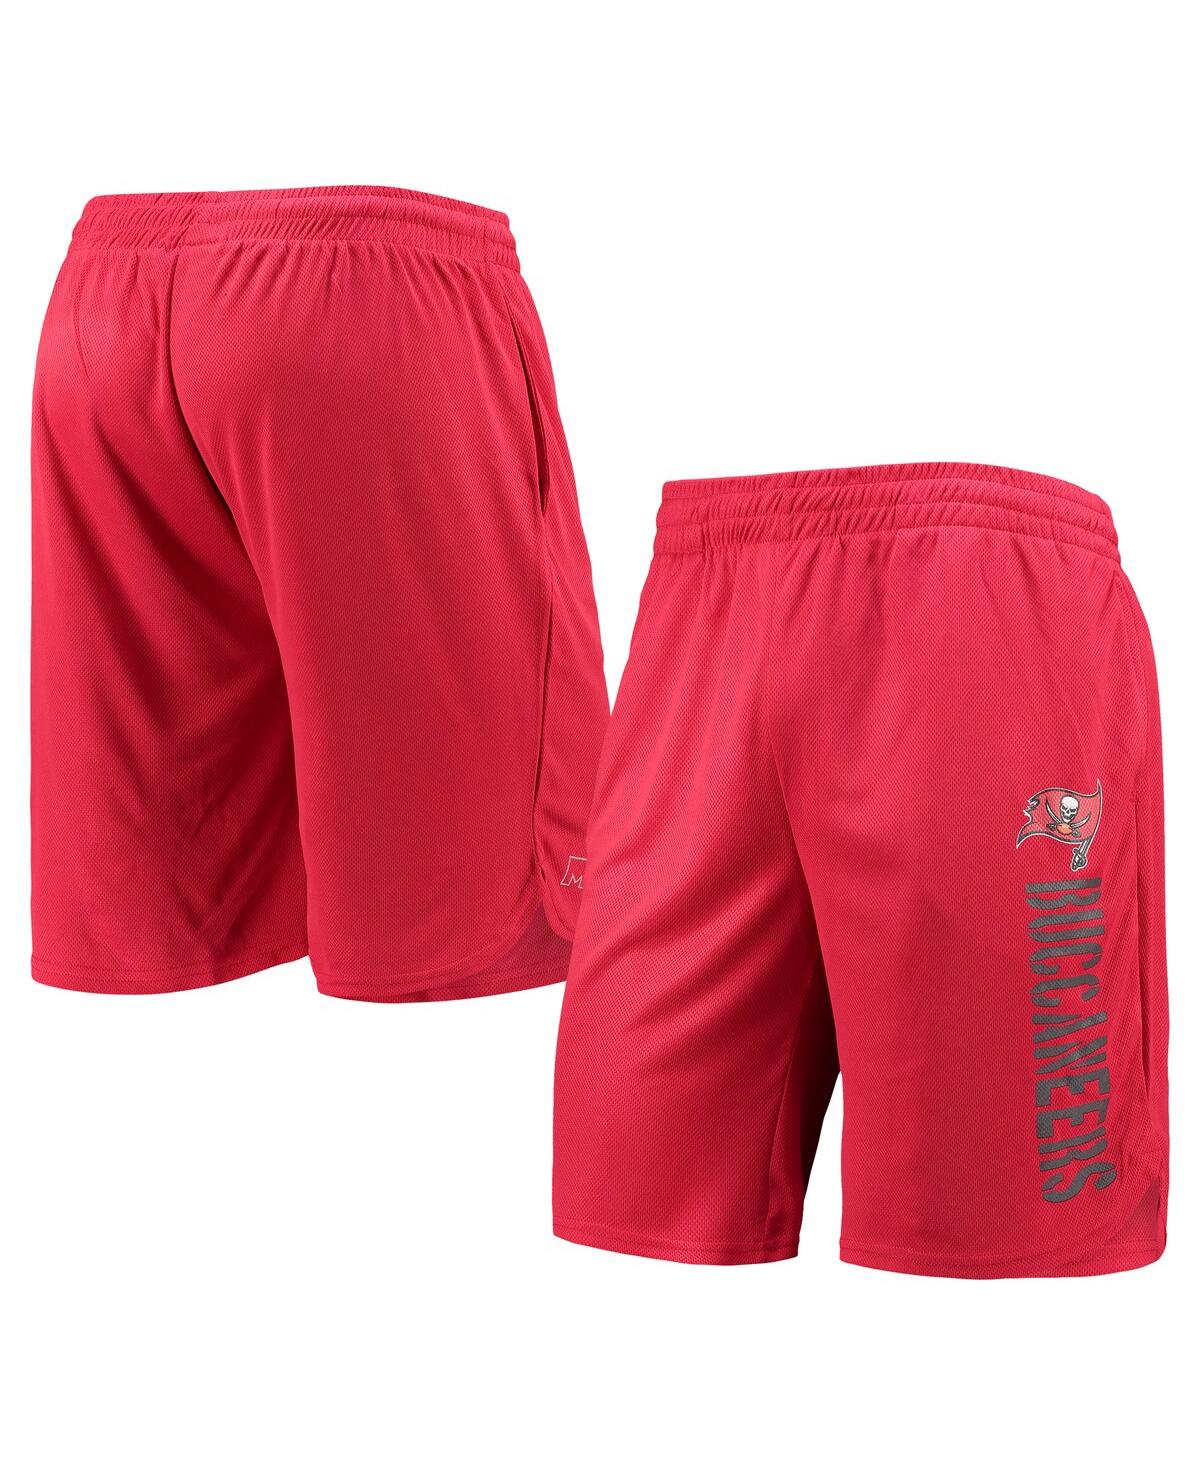 Msx By Michael Strahan Men's  Red Tampa Bay Buccaneers Training Shorts